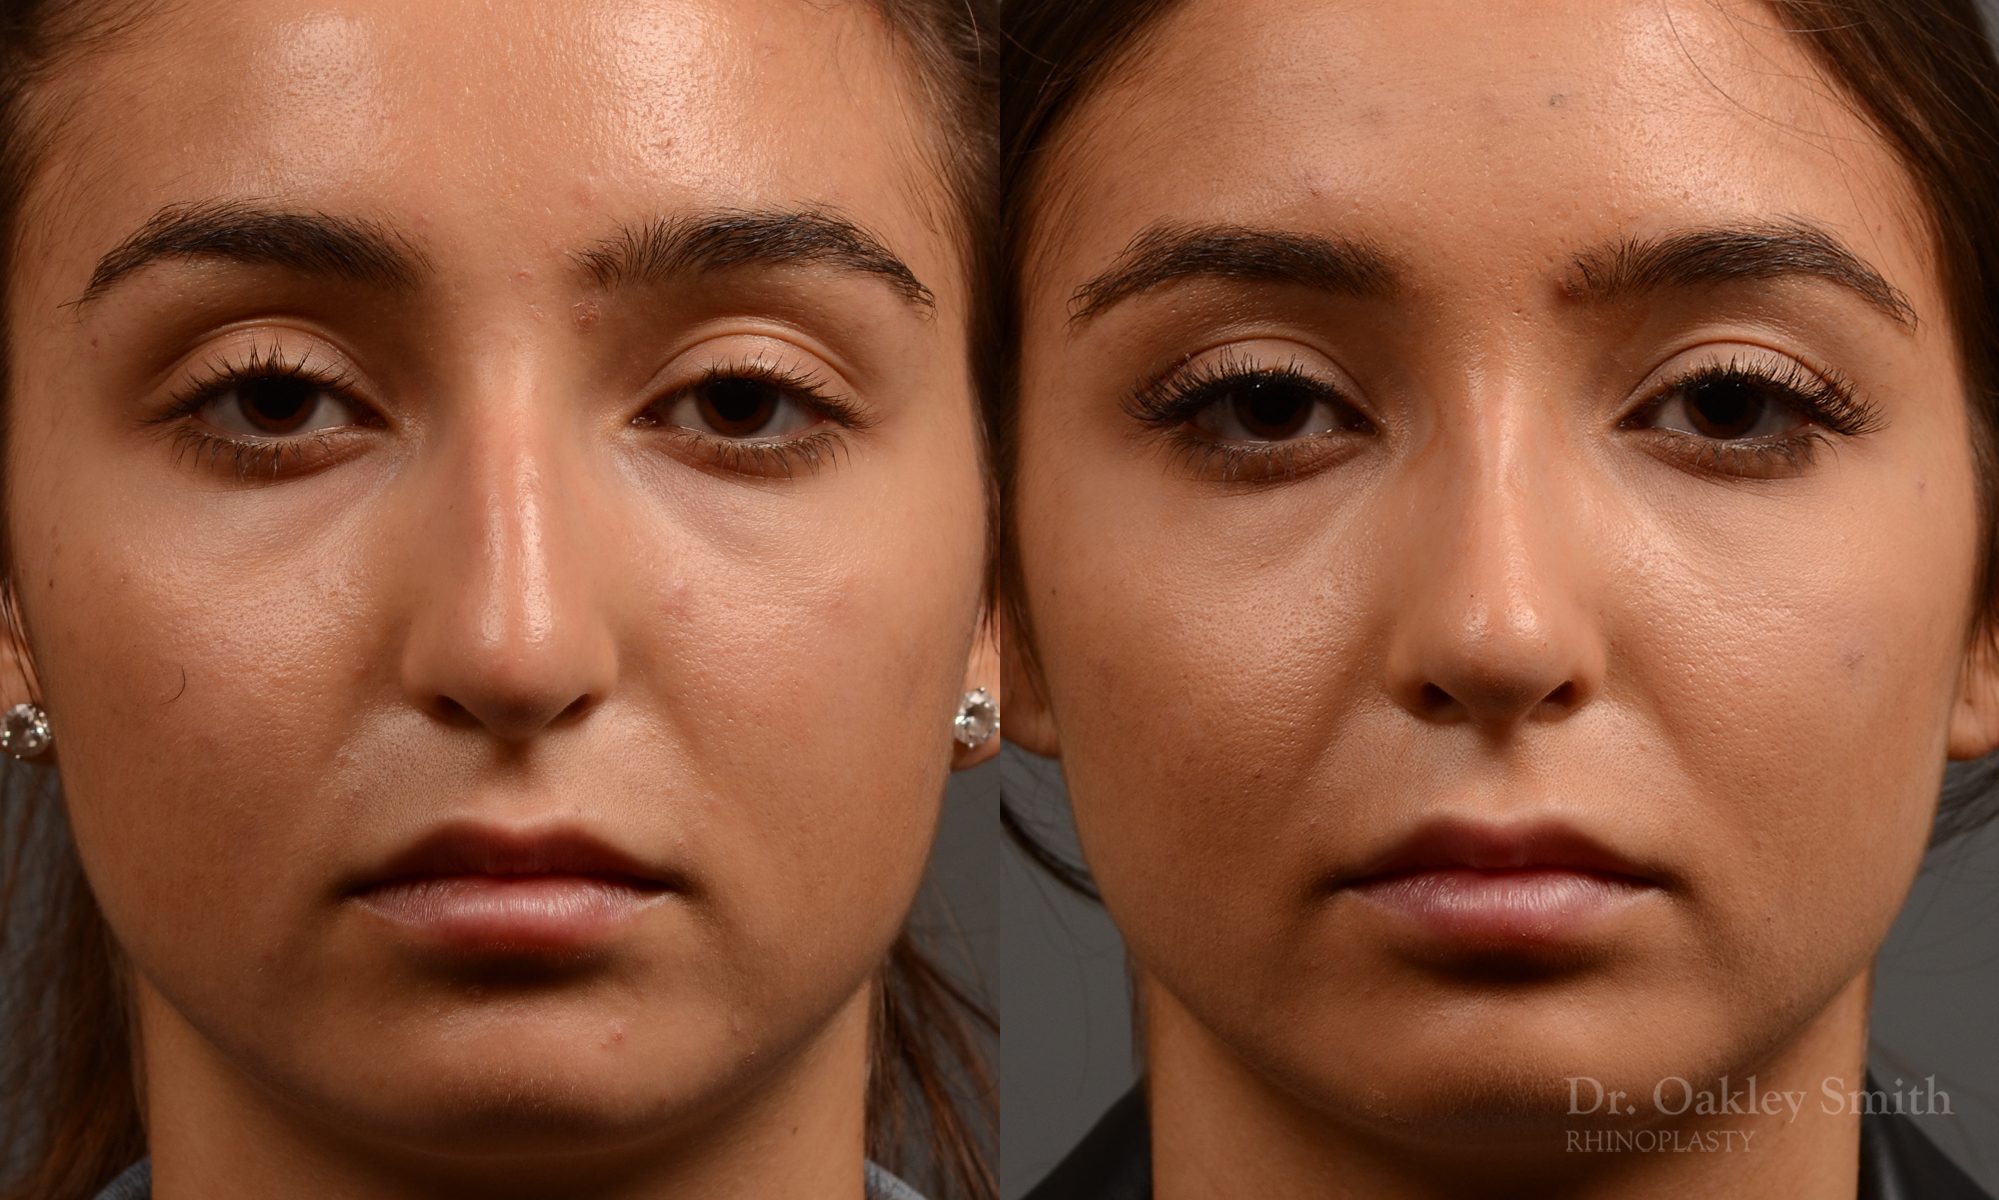 400 - Expert Rhinoplasty nose job surgery to reduce the size of this womans nose.